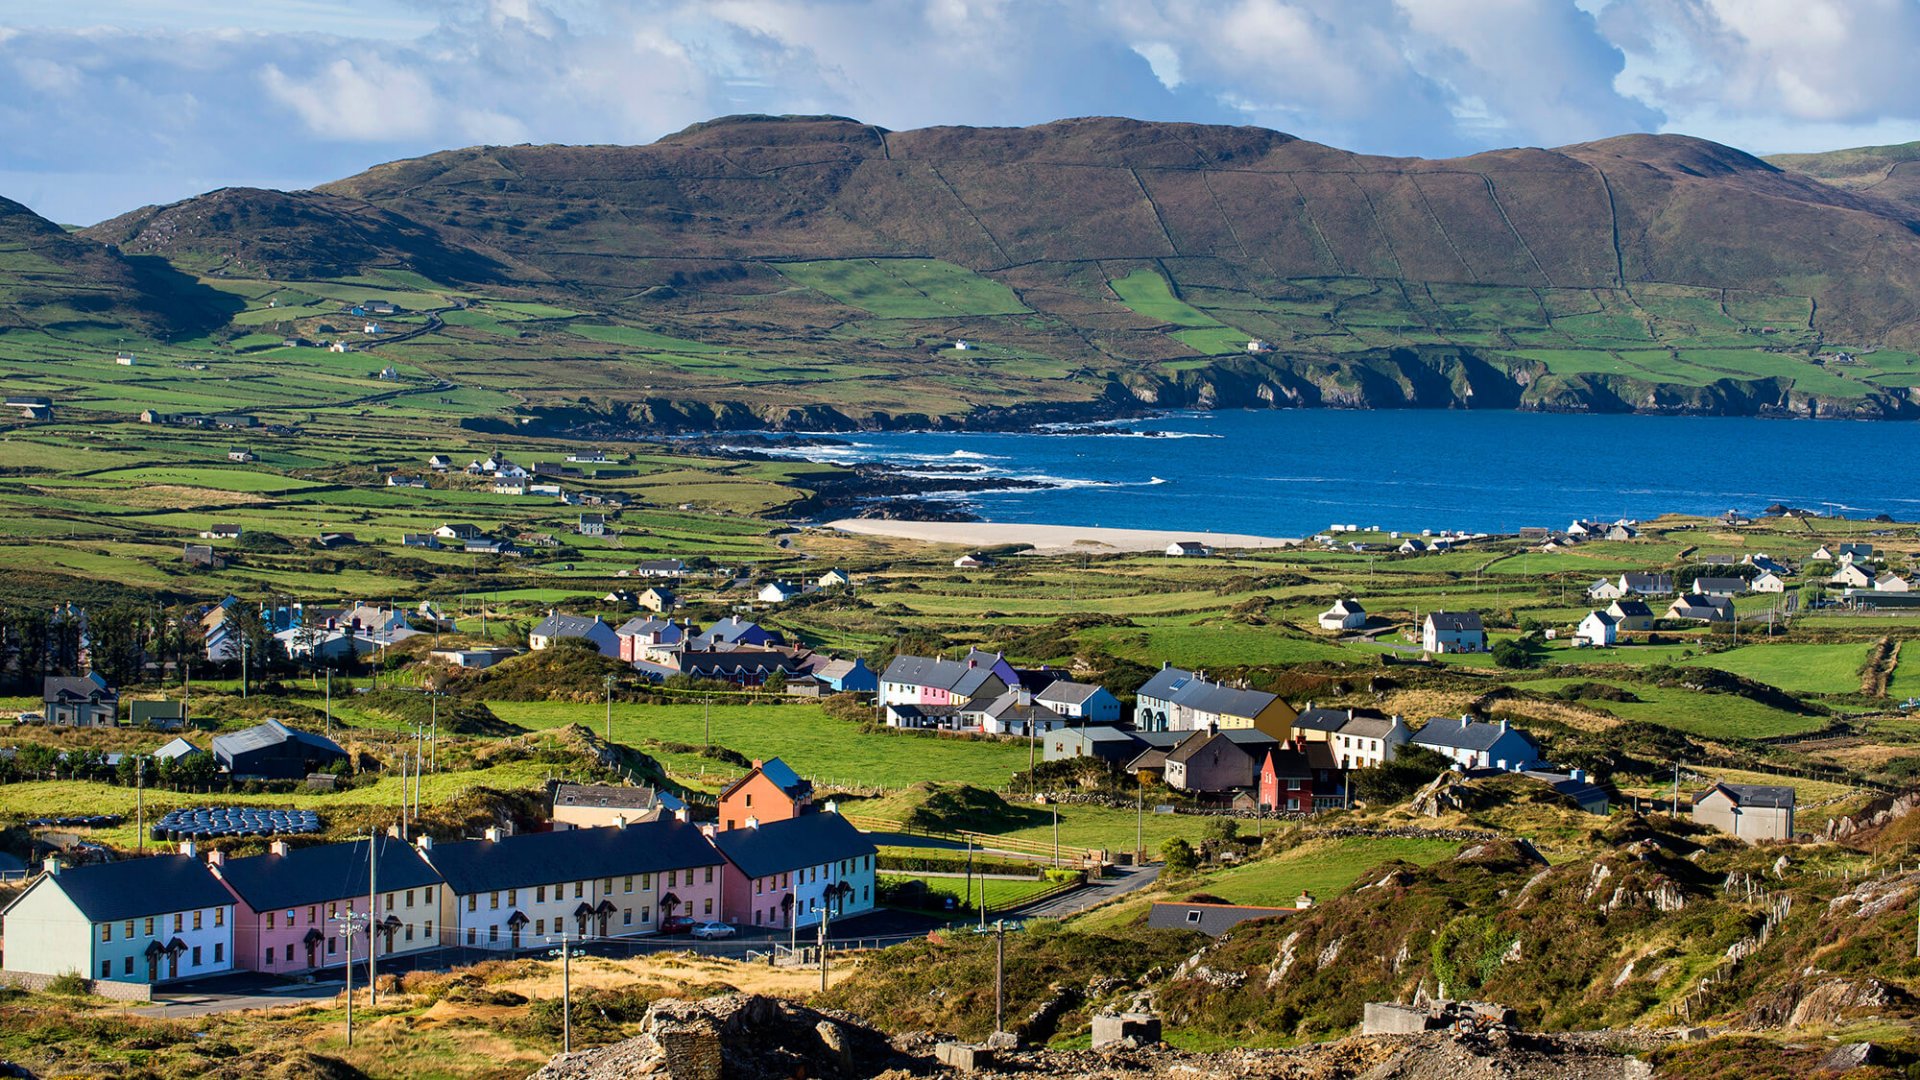 Scenic green fields, quaint village and ocean at Allihies on the Beara Peninsula in Ireland